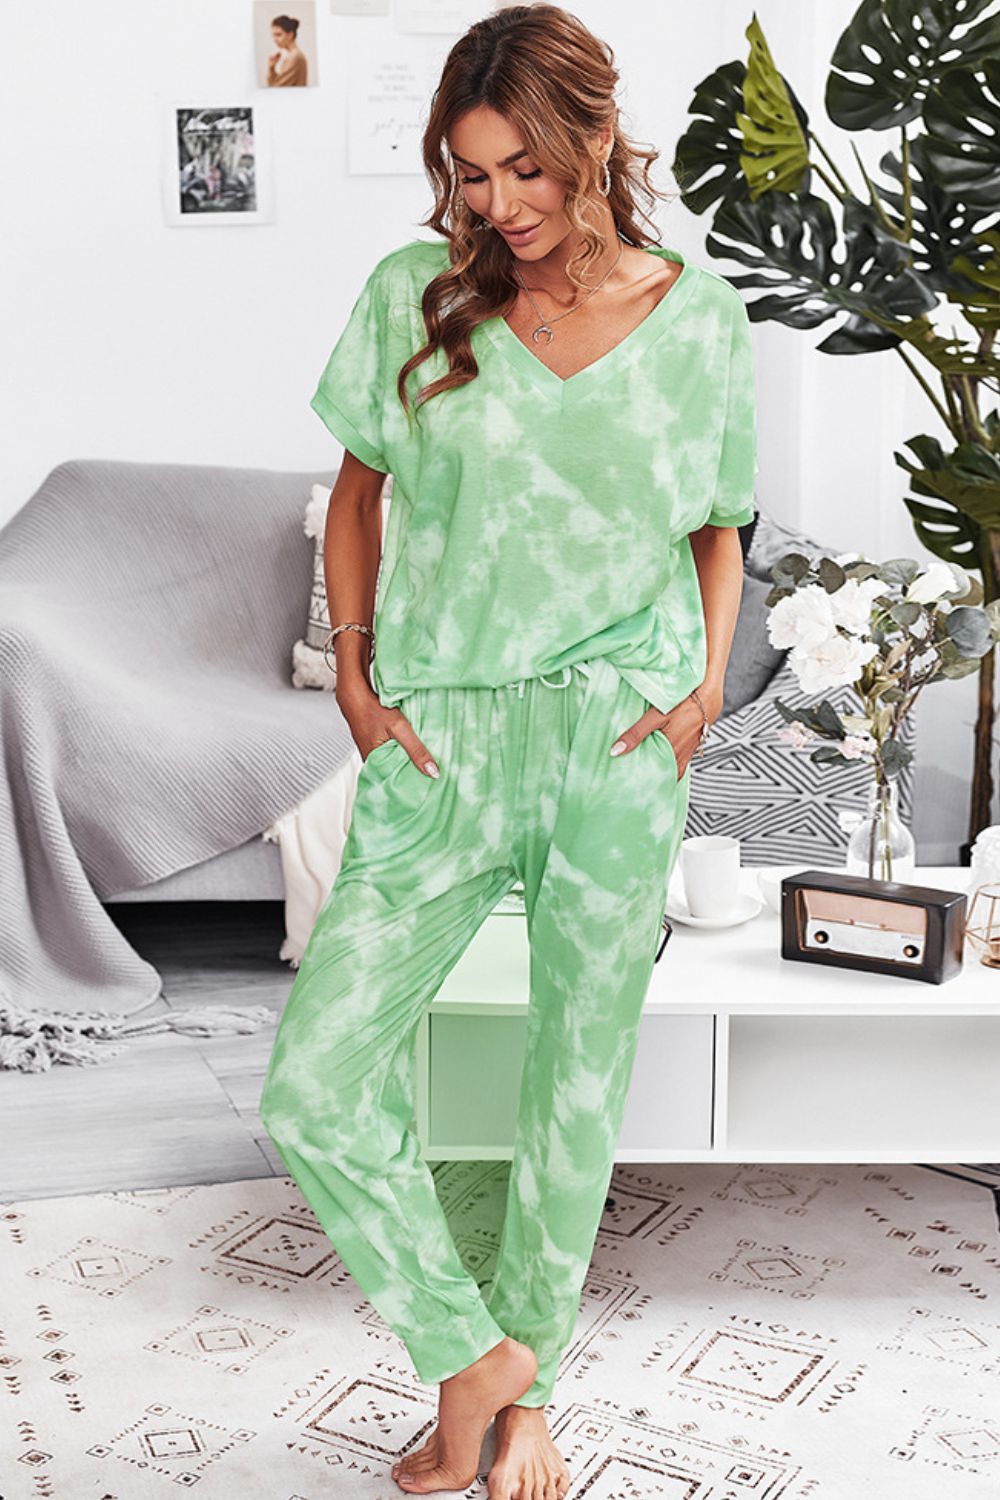 Lounge: Tie-Dye V-Neck Tee and Joggers Lounge Set